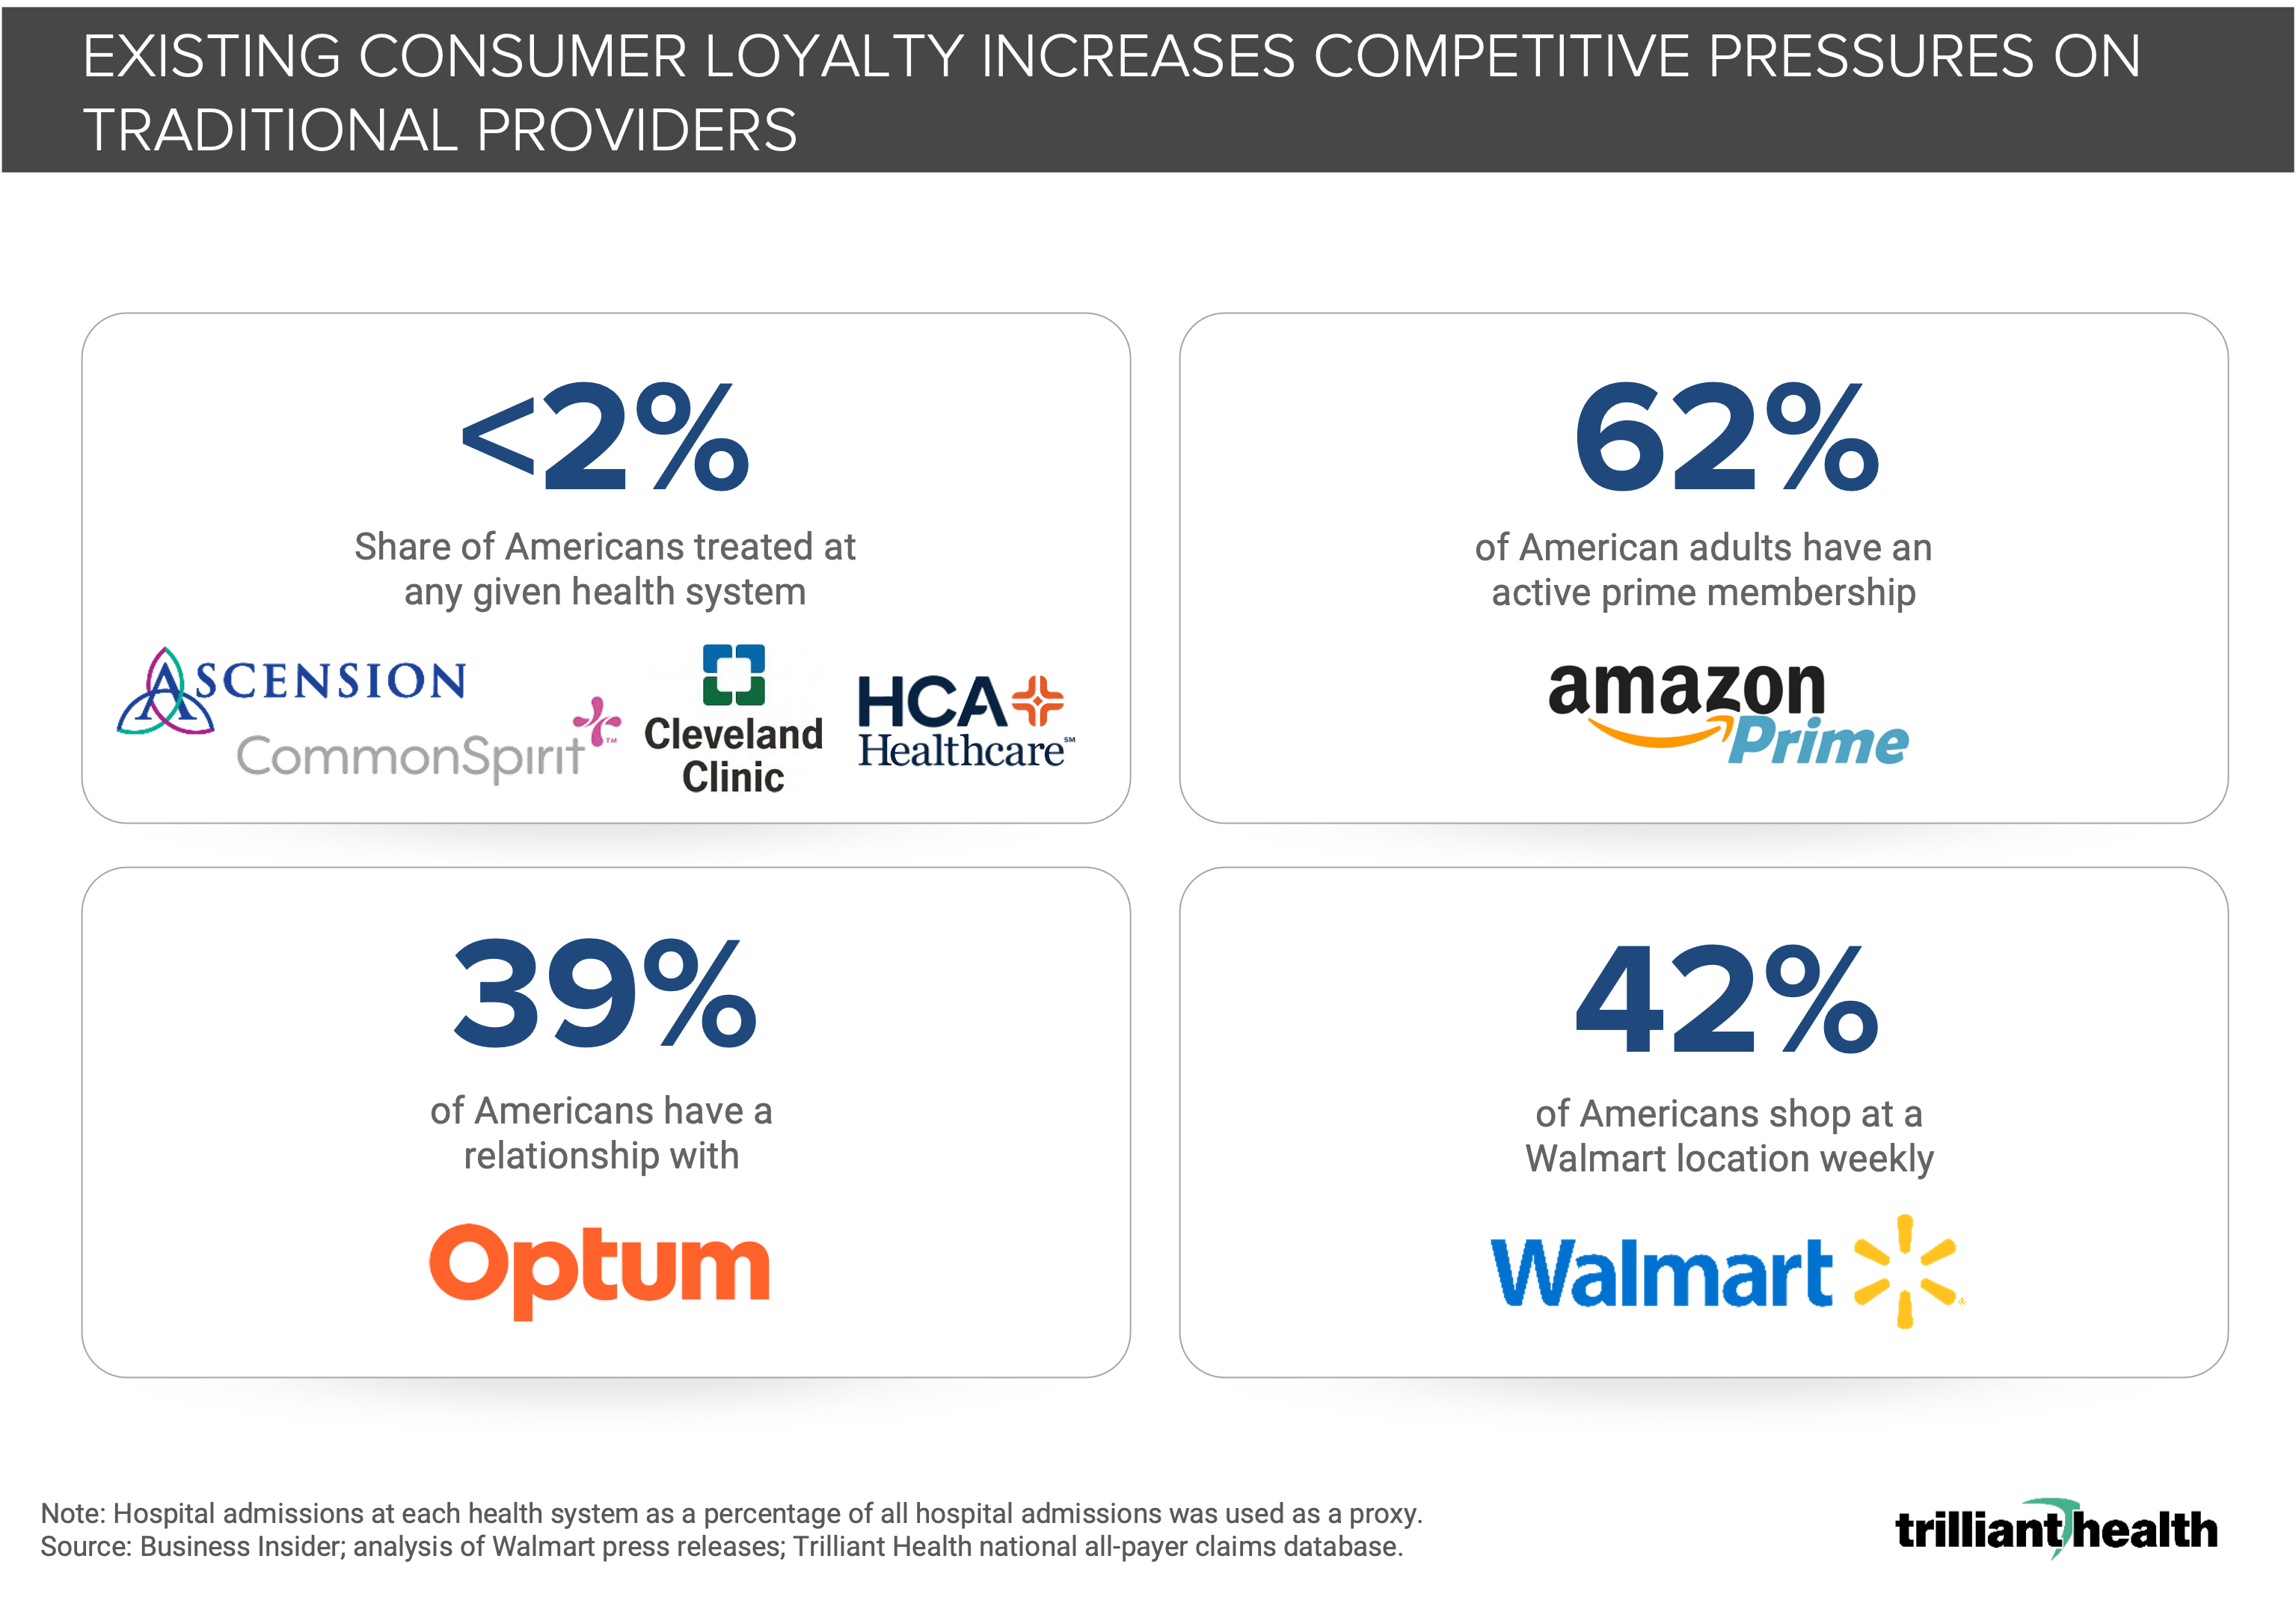 Figure that shows the consumer loyalty to health systems versus retail entrants Amazon and Walmart